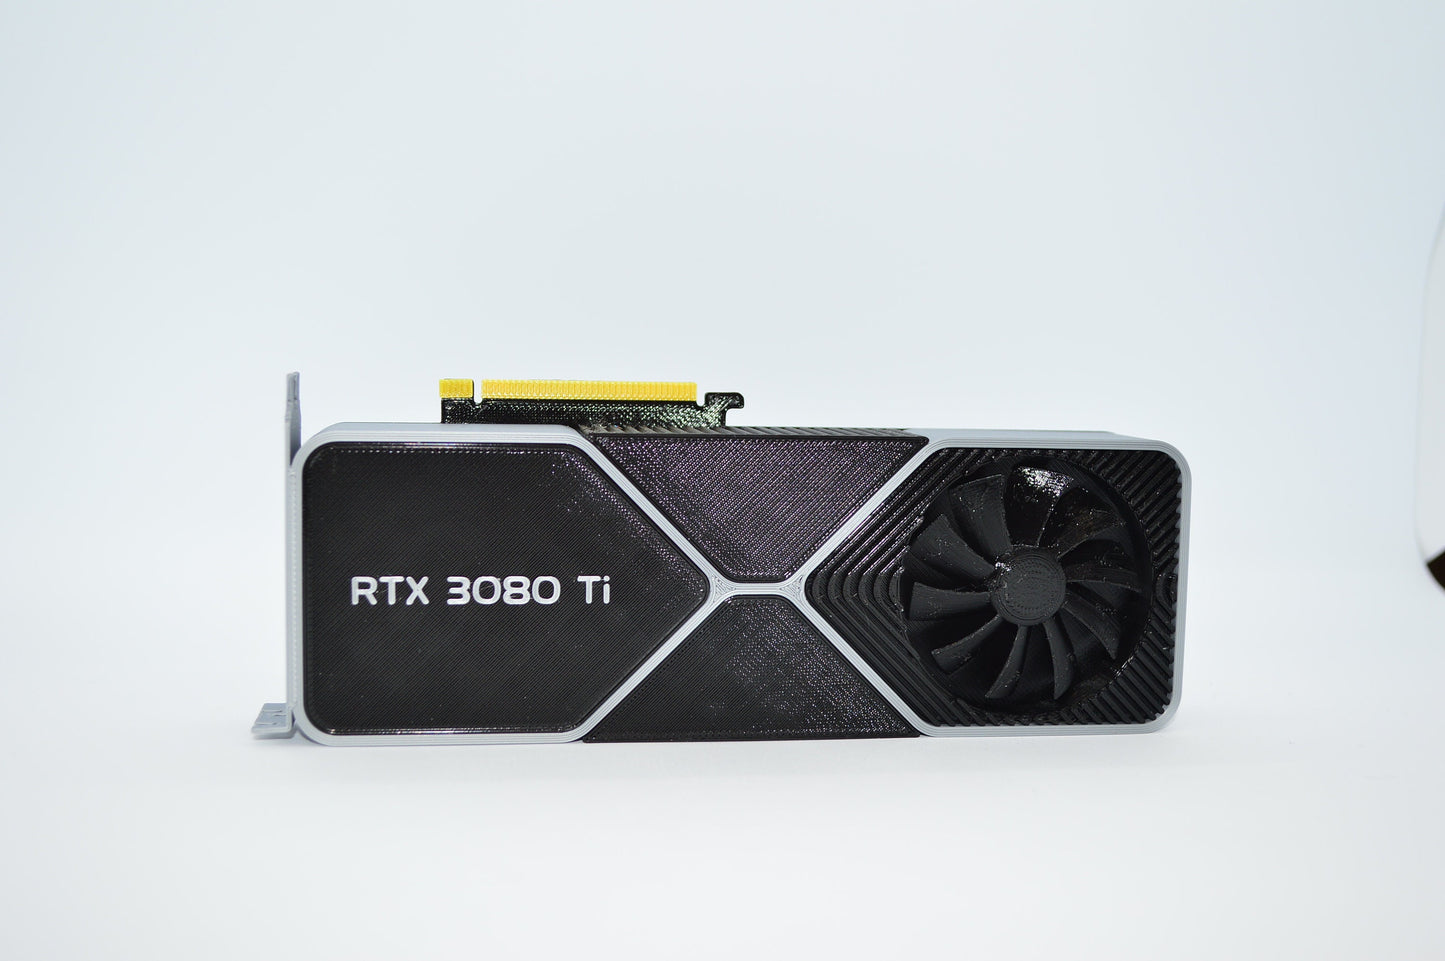 Founders Edition RTX 3080 TI 3D Printed Video Card Model